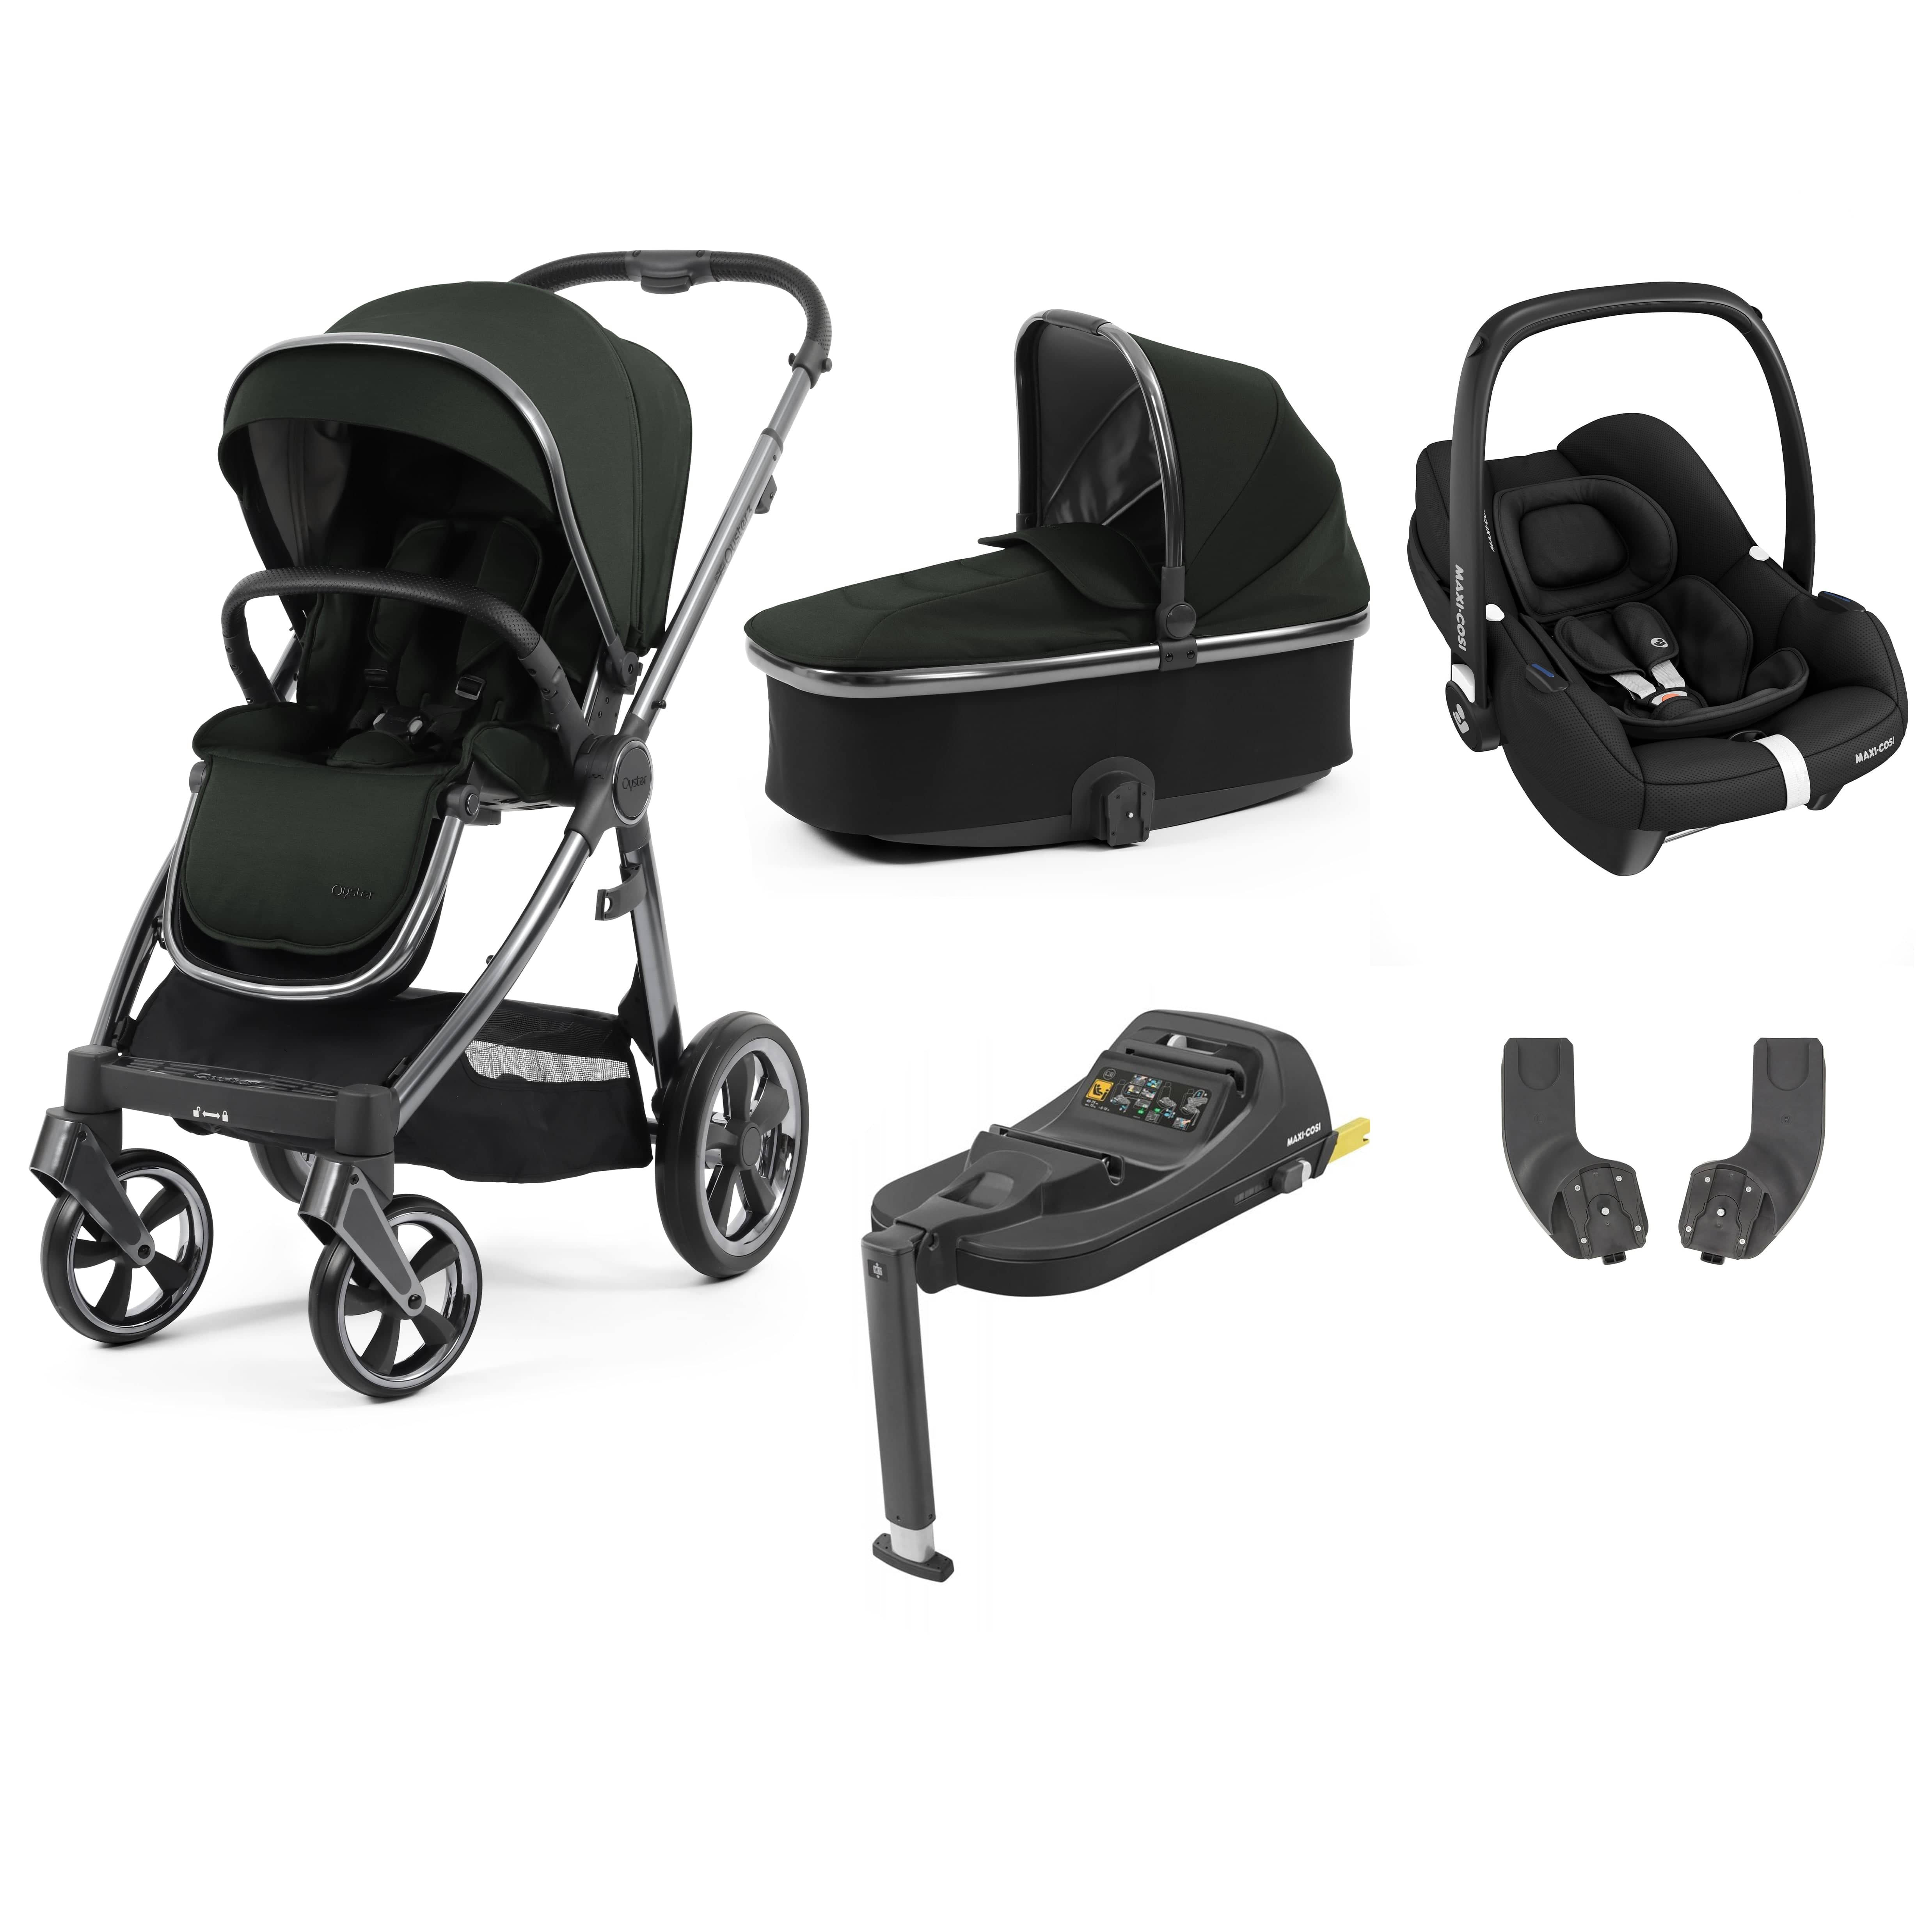 BabyStyle travel systems Babystyle Oyster 3 Essential Bundle with Car Seat - Black Olive 14761-BLO